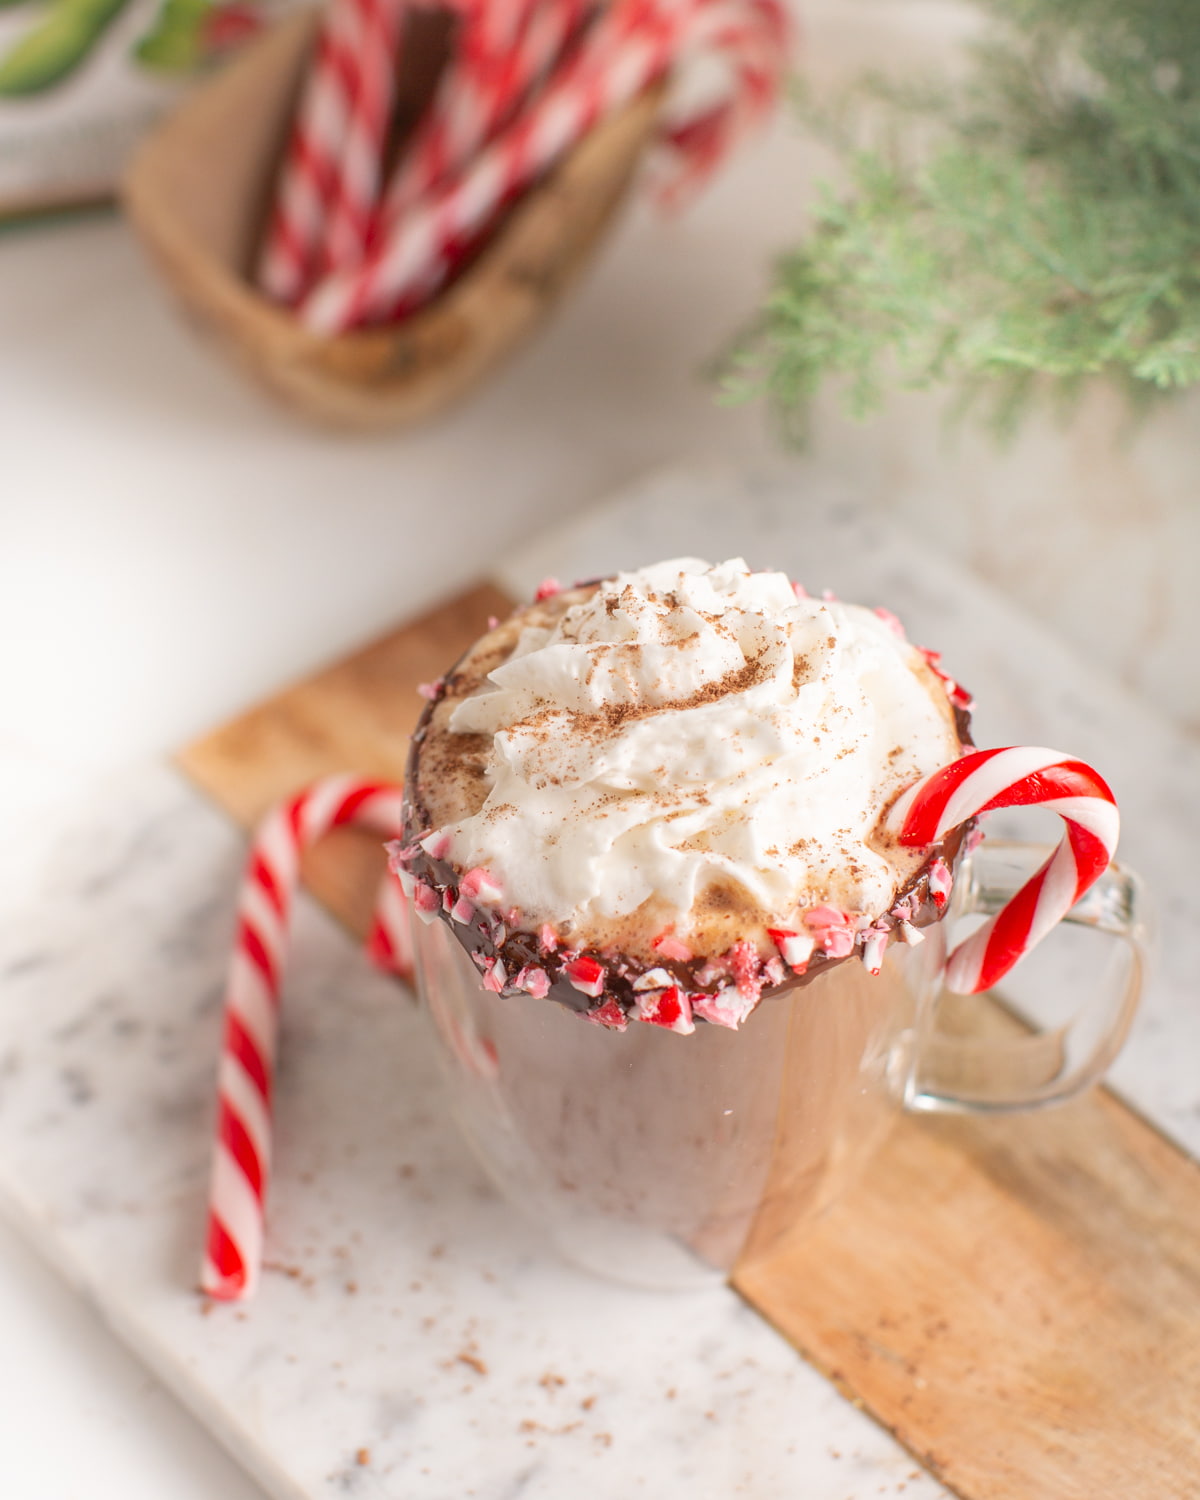 Peppermint mocha made vegan in a mug with dairy-free whipped cream and crushed candy canes on the rim.